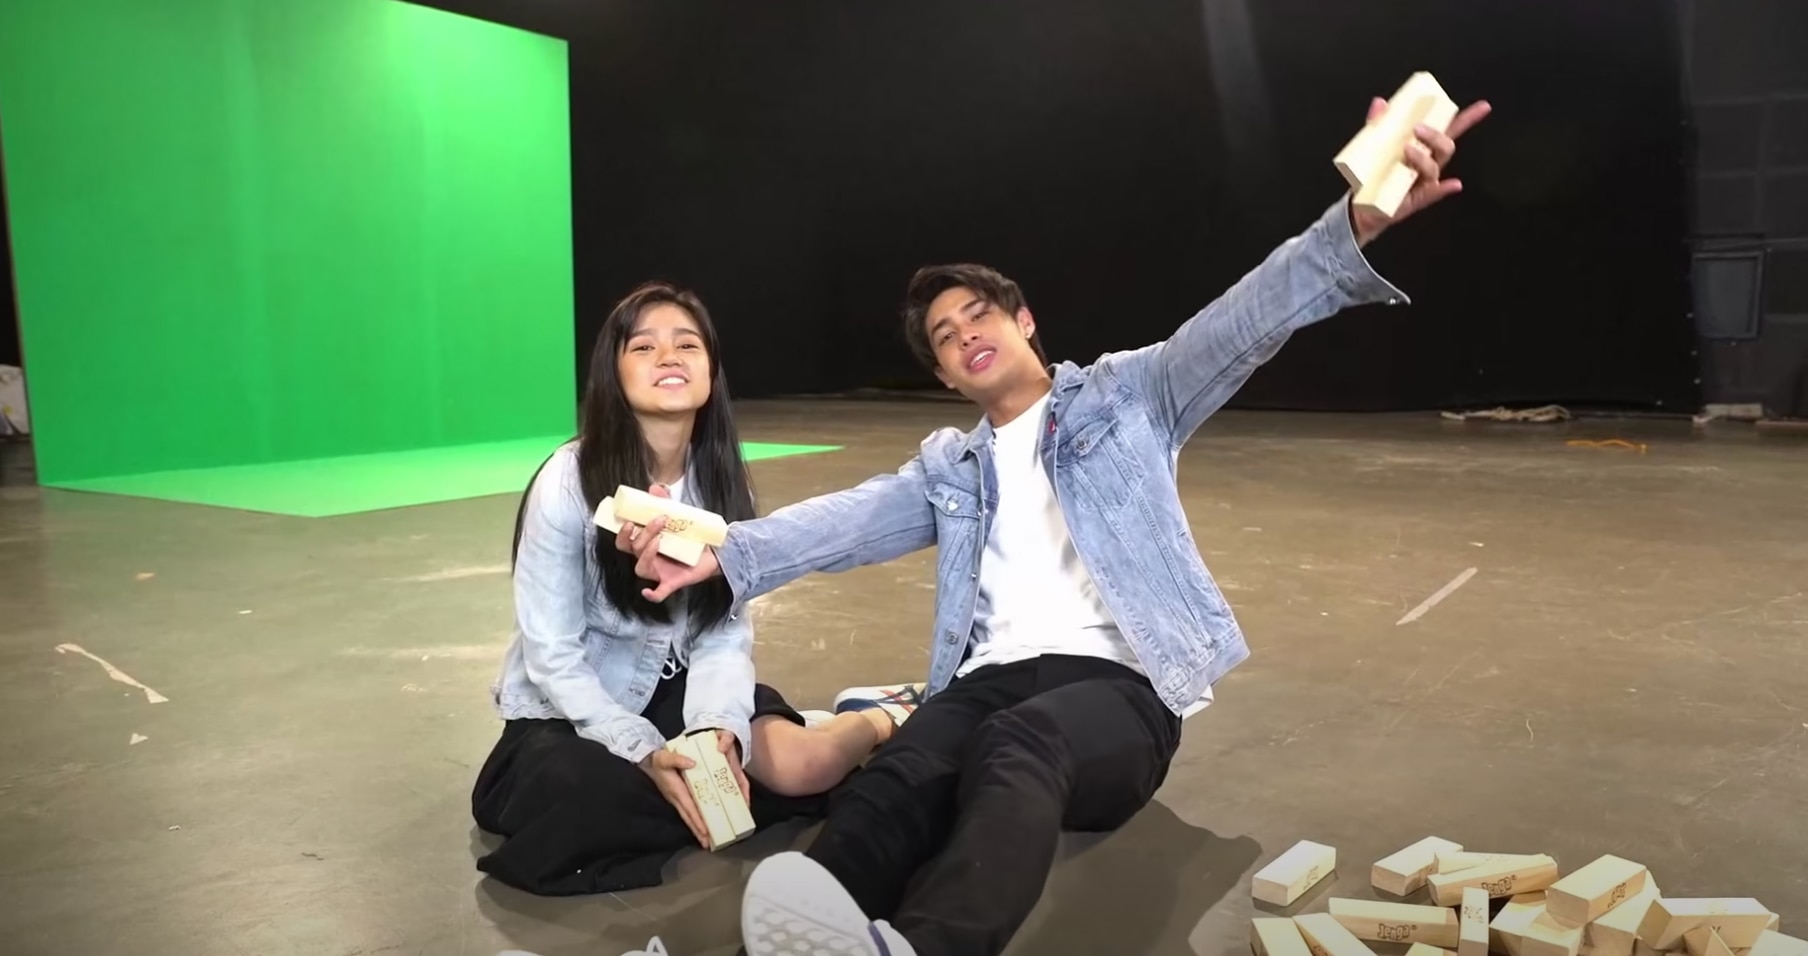 HIH Extras 2 with Belle Mariano and Donny Pangilinan